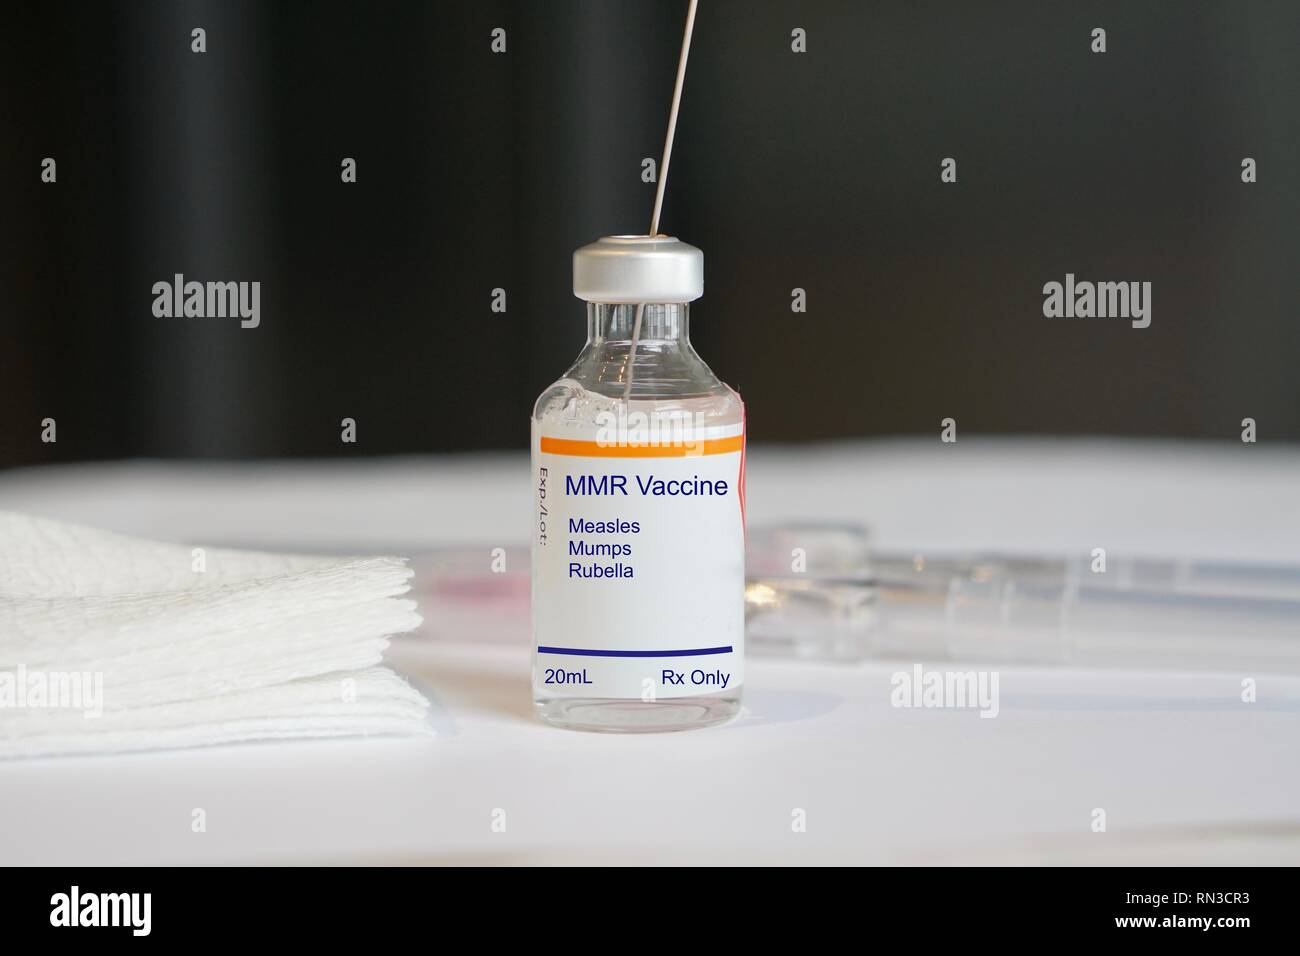 MMR Vaccine for measles, mumps, and rubella in a glass vial in a medical setting Stock Photo